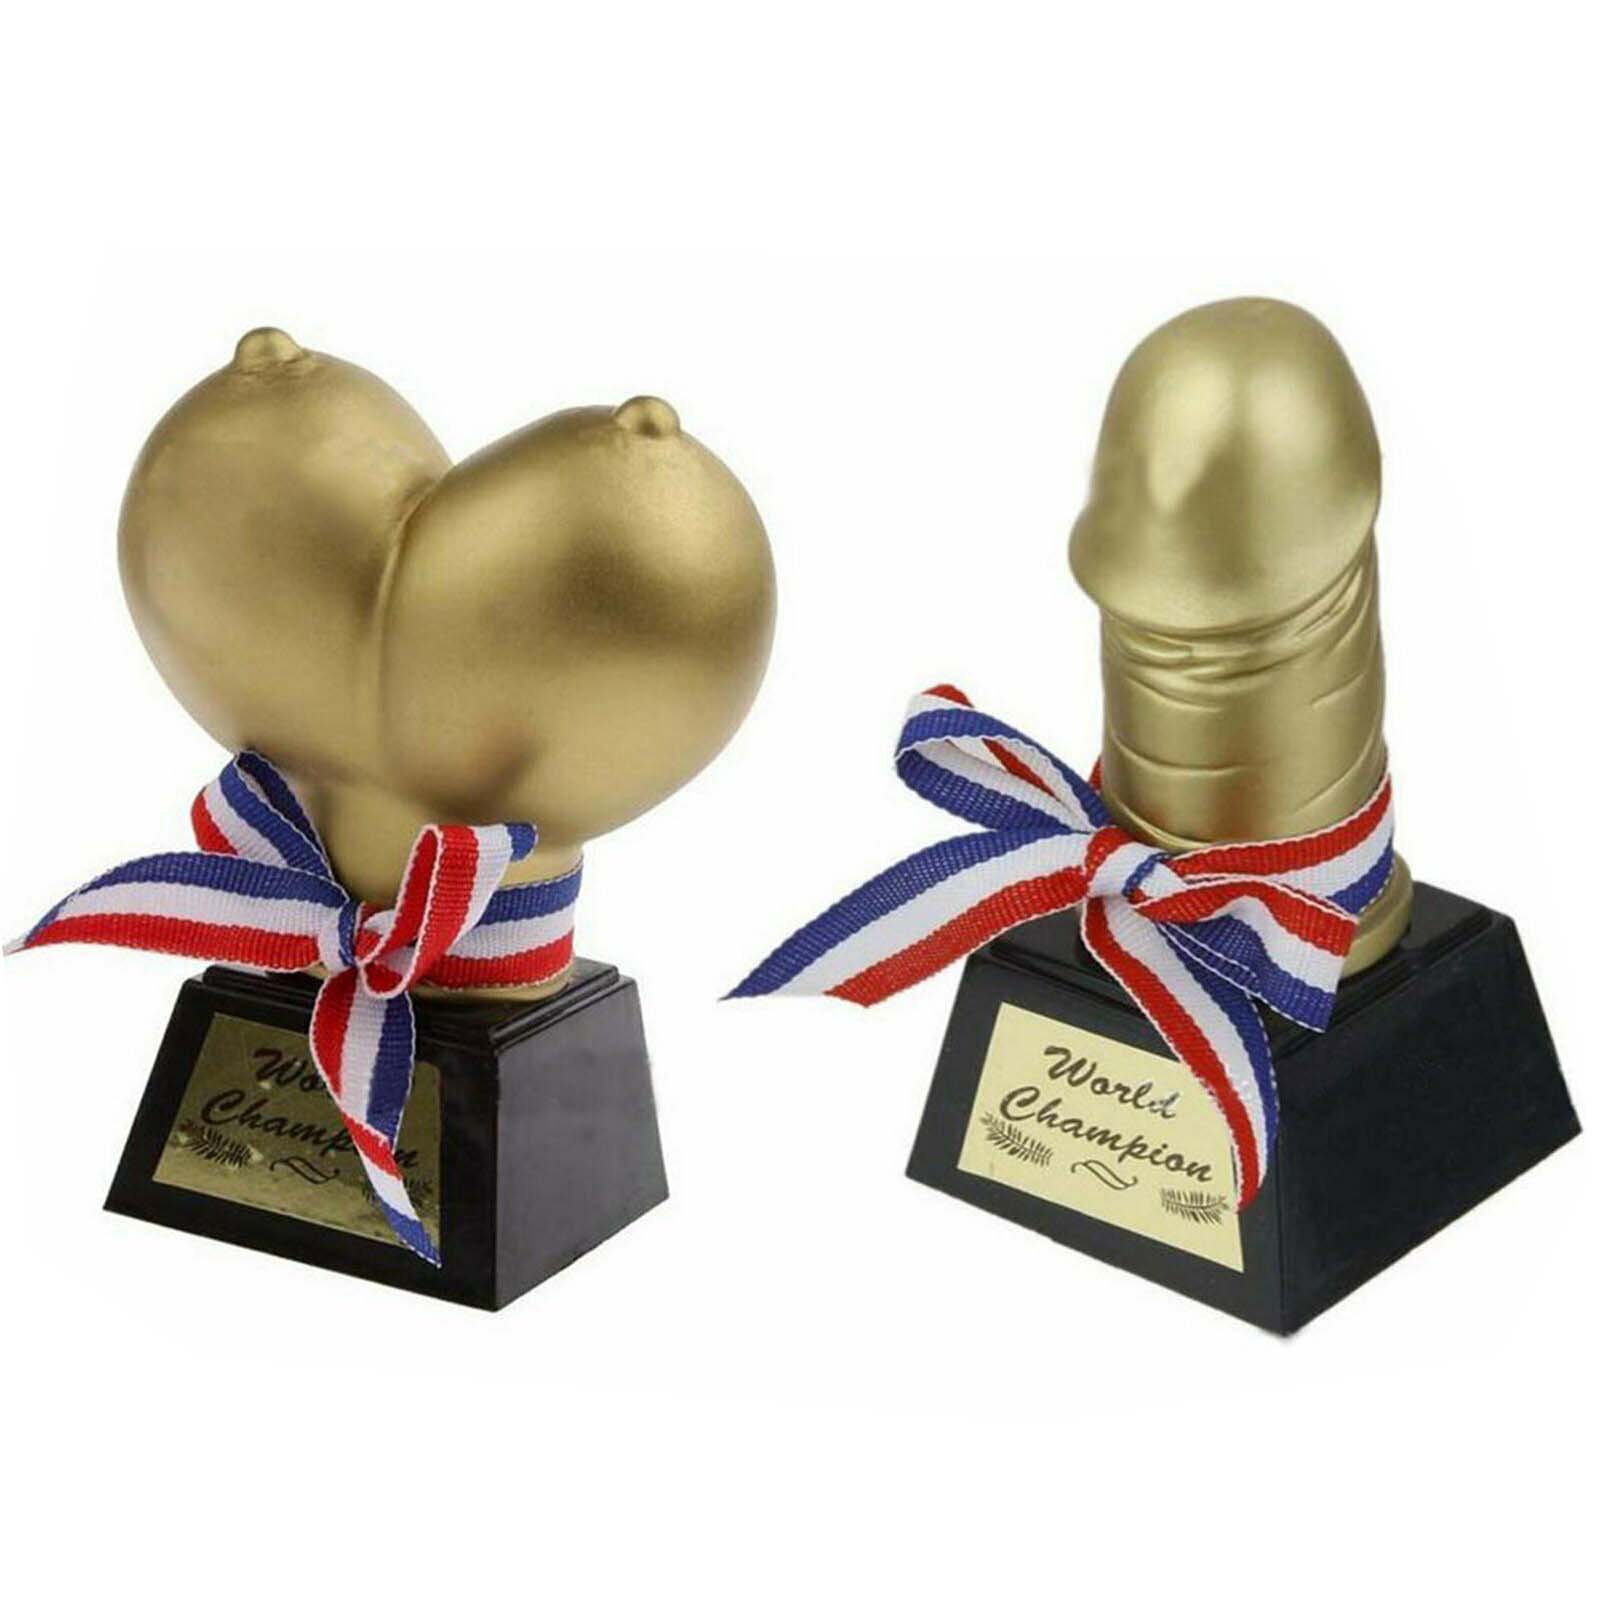 2pcs Funny Willy World Champion Trophy Hen Night Party Novelty Gag Gift 